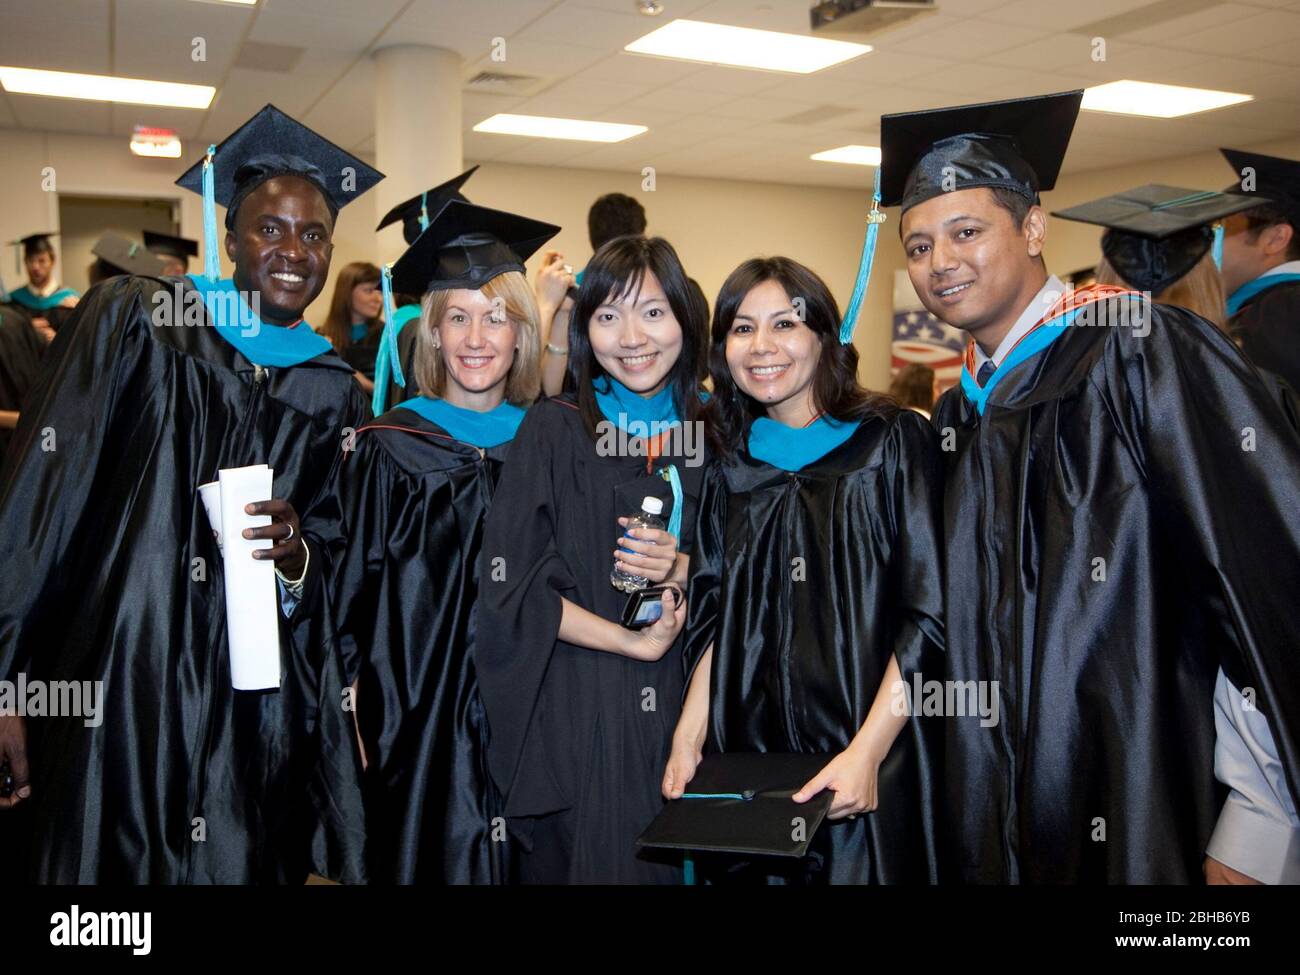 Austin Texas USA, May 22, 2010: Students pose for a photo during graduation festivities at the Lyndon Baines Johnson (LBJ) School of Public Affairs. Approximately 108 students received their Masters or PhD degrees in public policy studies through the school at the University of Texas at Austin. ©Bob Daemmrich Stock Photo